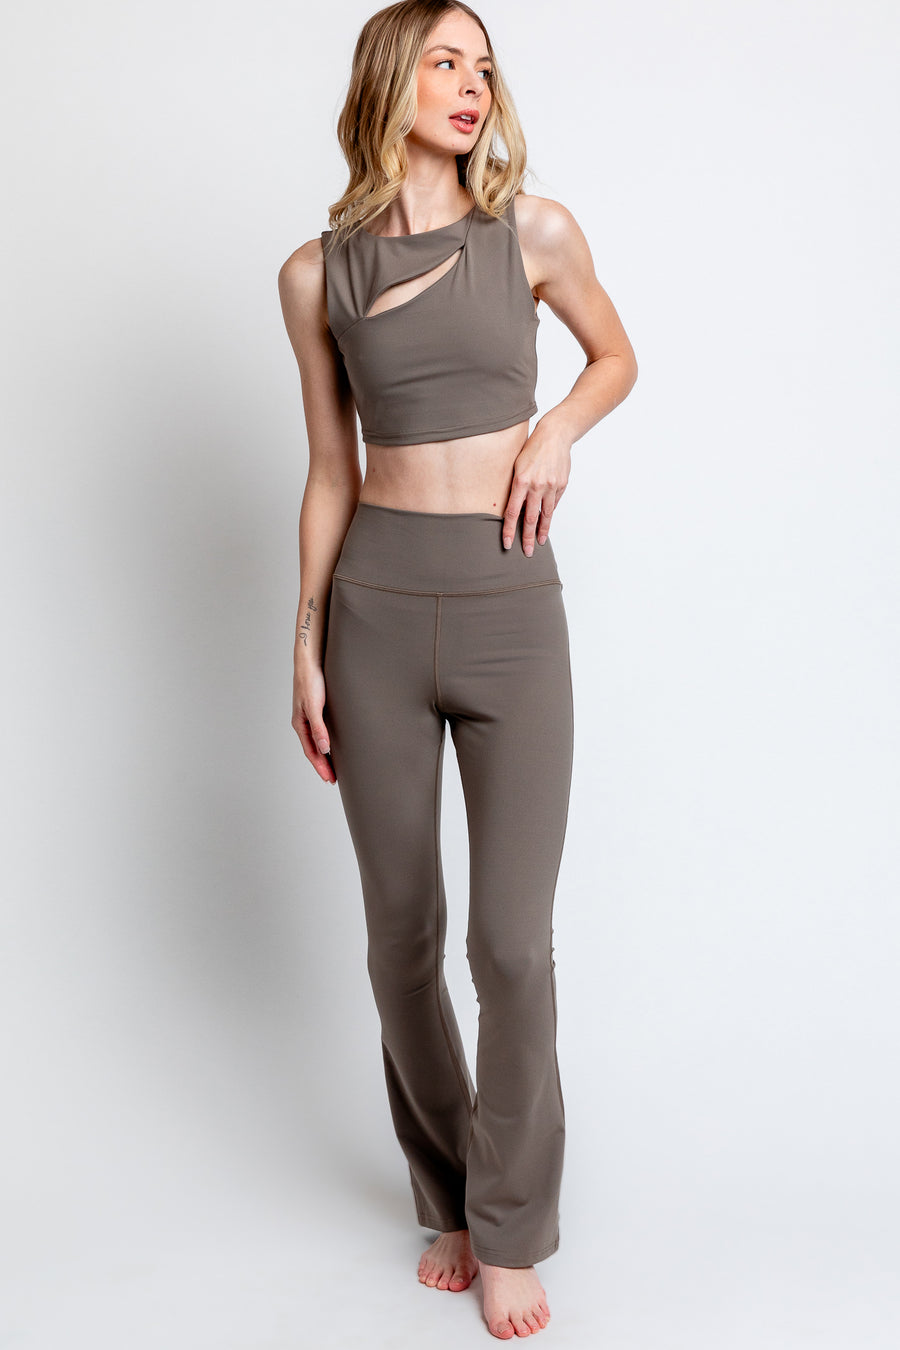 Spiritual Gangster Giselle Bootcut Pant in Falcon